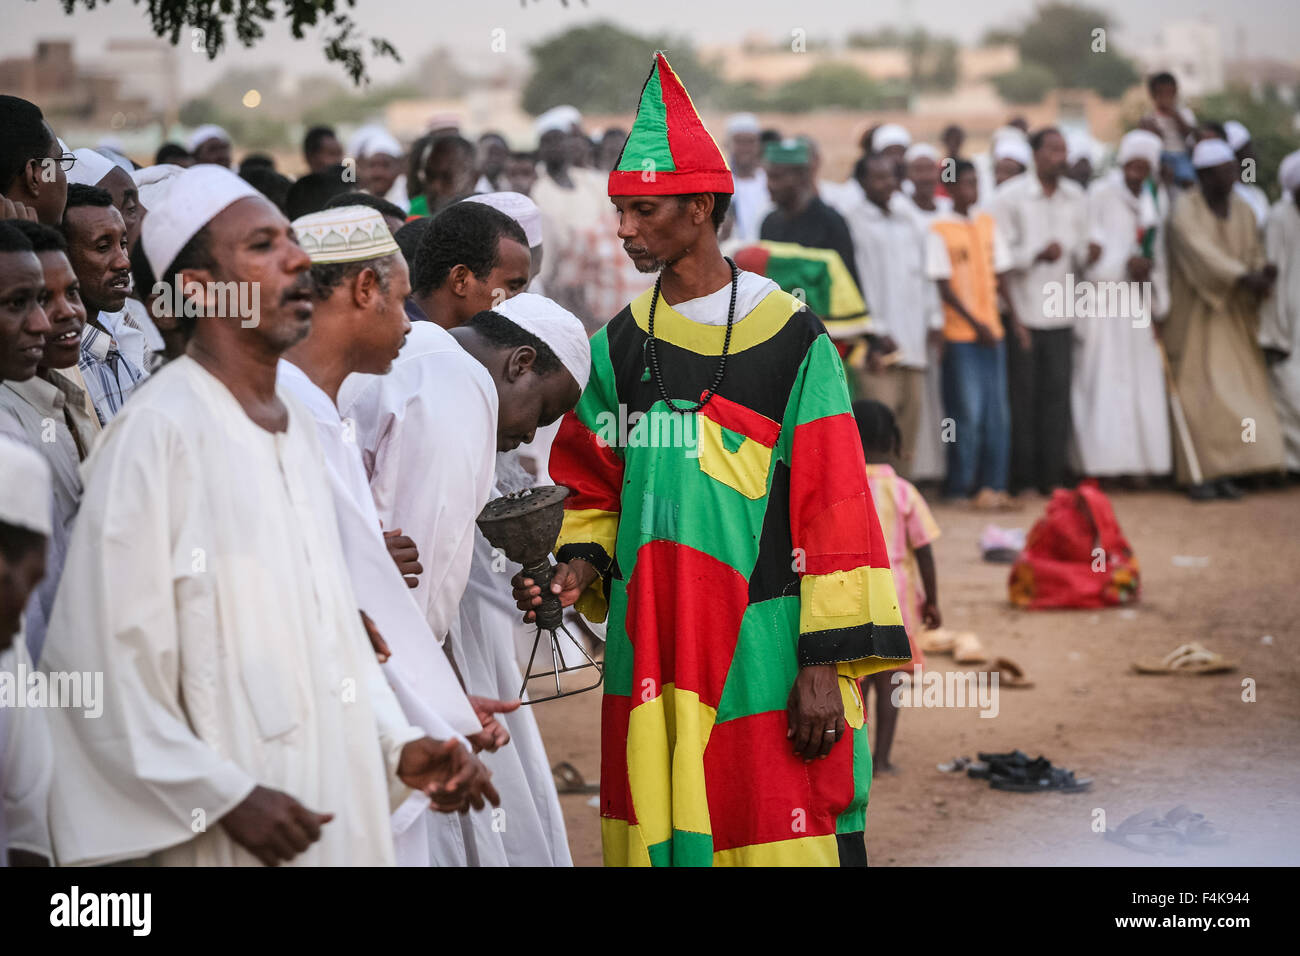 Sufi dervishes gather for religious rituals in Omdurman Stock Photo